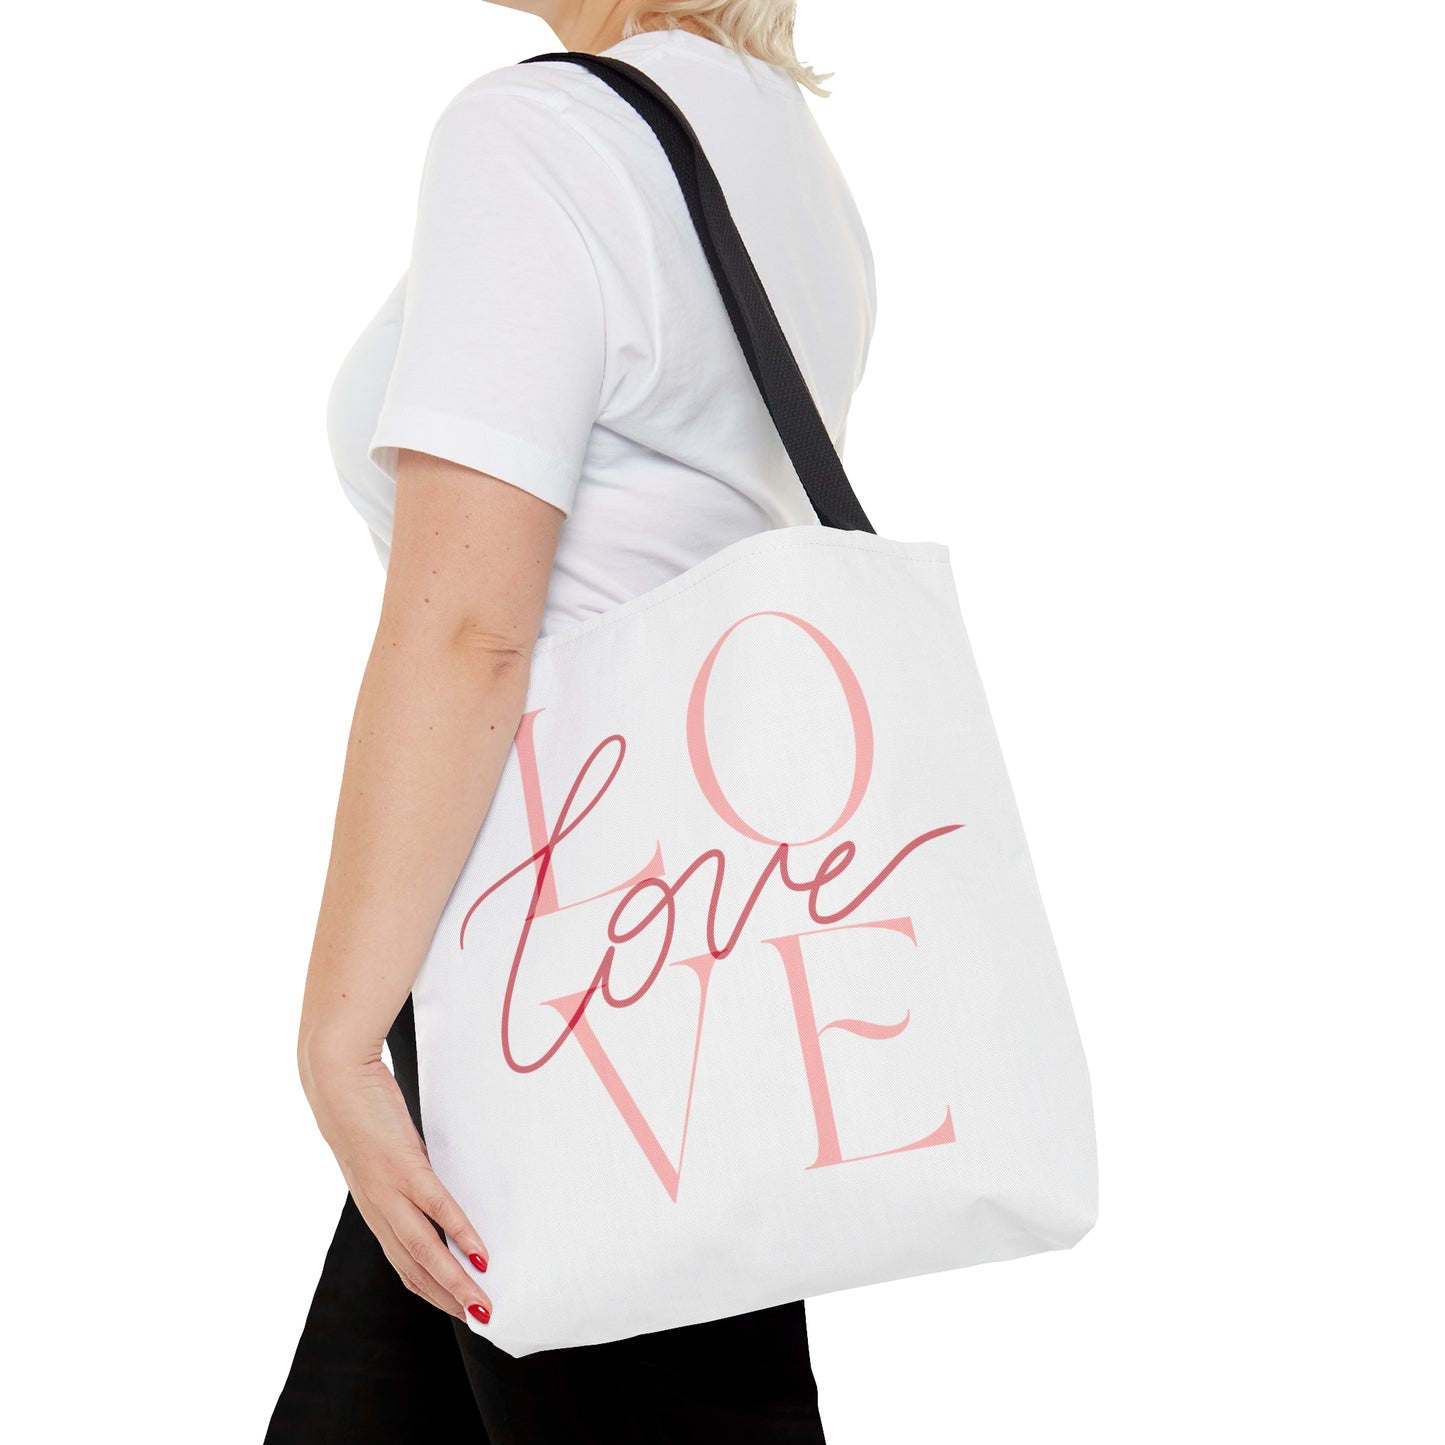 Valentine Tote Bags, I Love U with Small Heart Printed Tote Bag